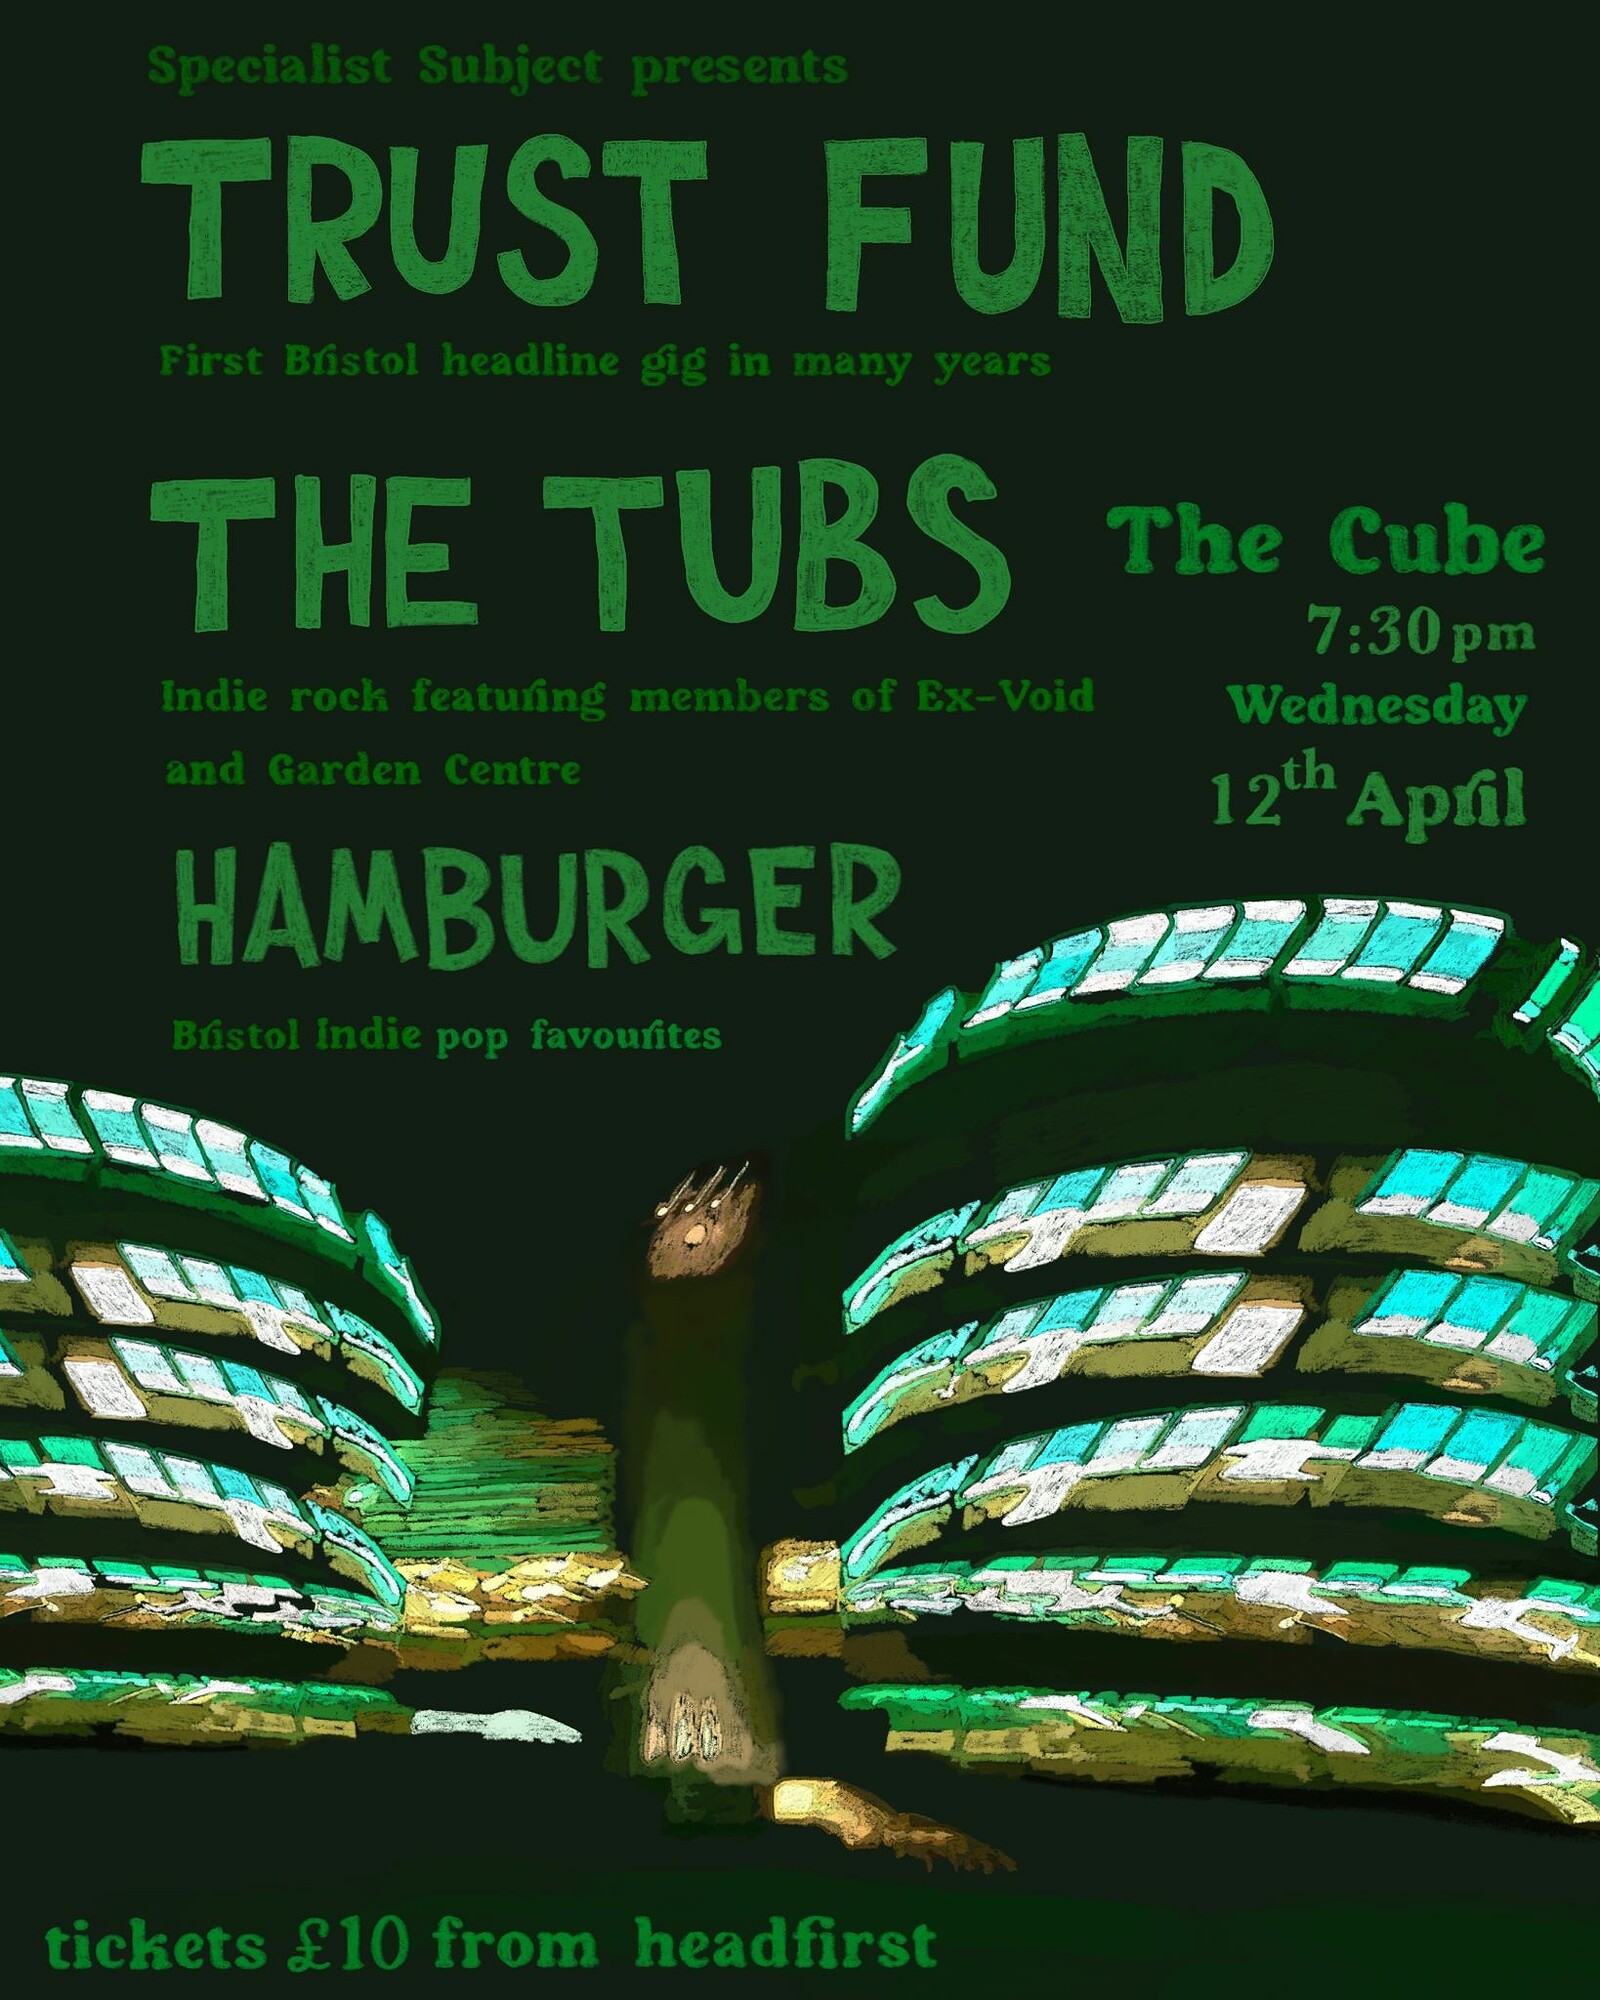 TRUST FUND & THE TUBS at The Cube